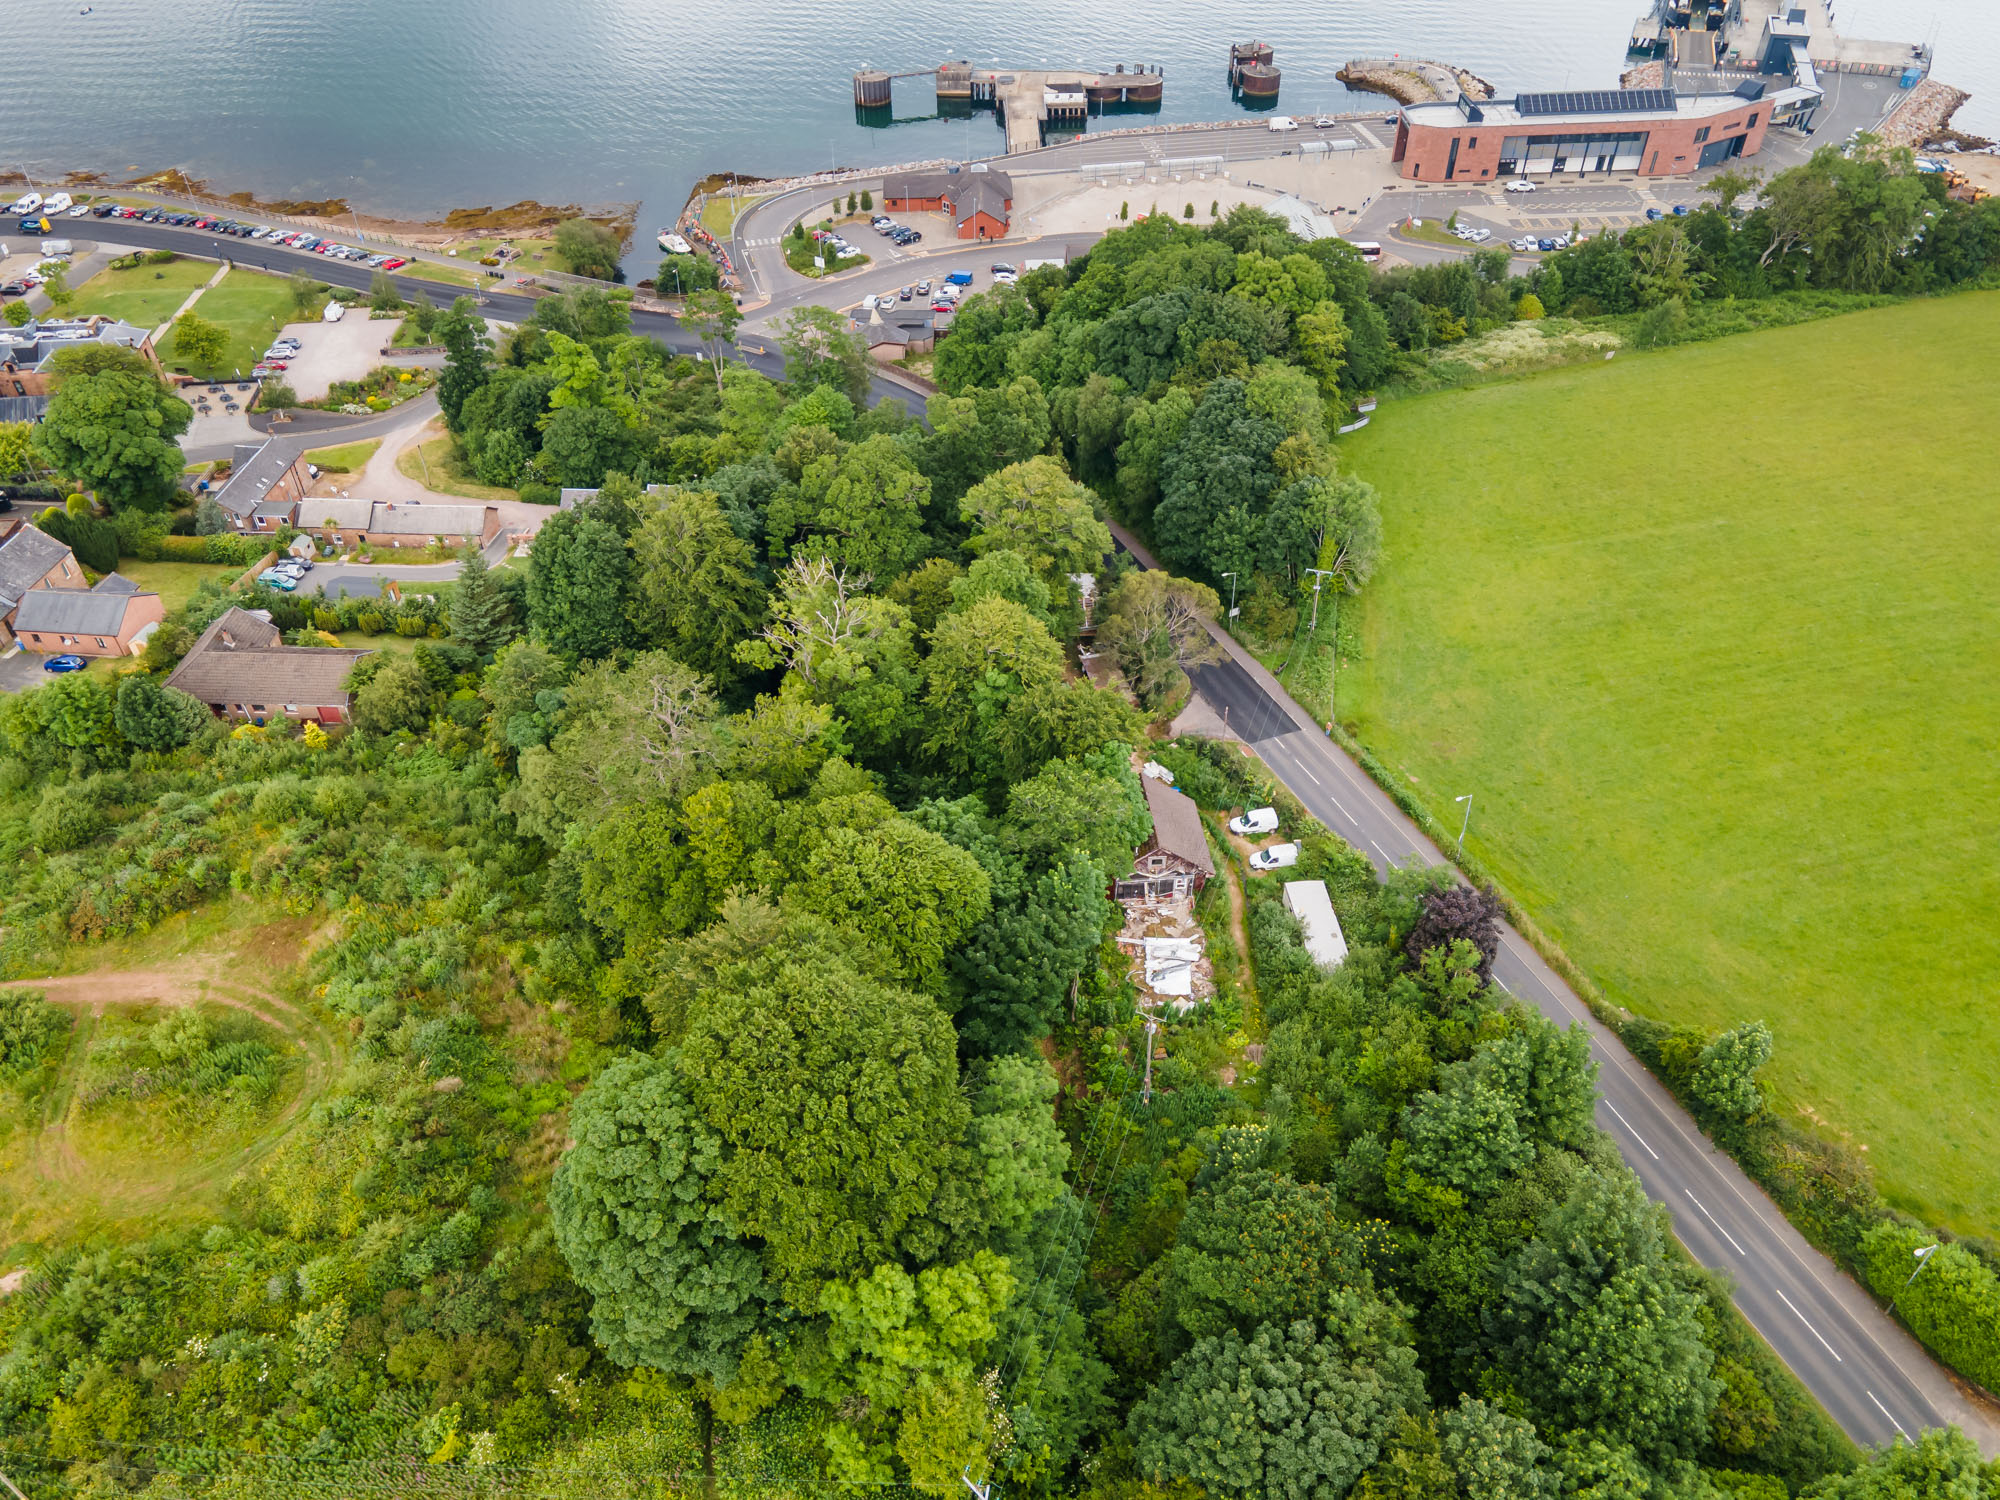 Prime development site is put up for sale in Brodick